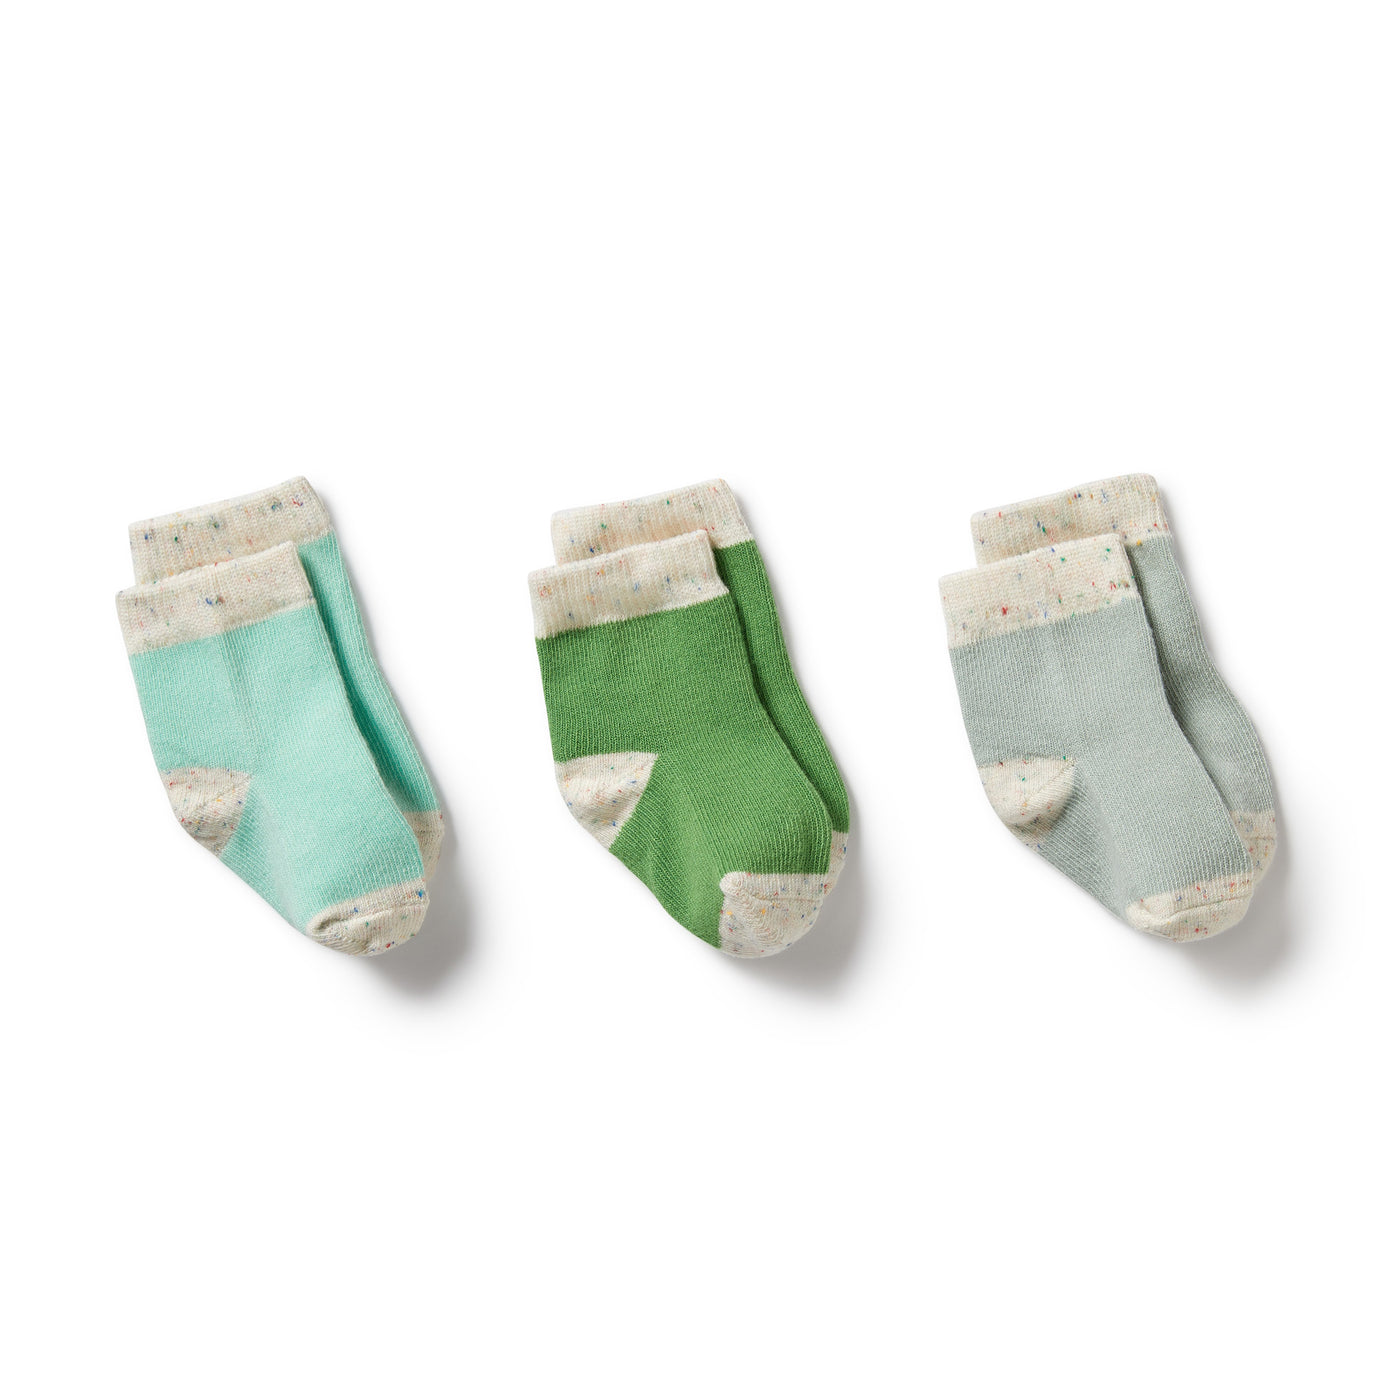 Wilson and Frenchy Organic 3 Pack Baby Socks - Mint Green, Cream and Pink